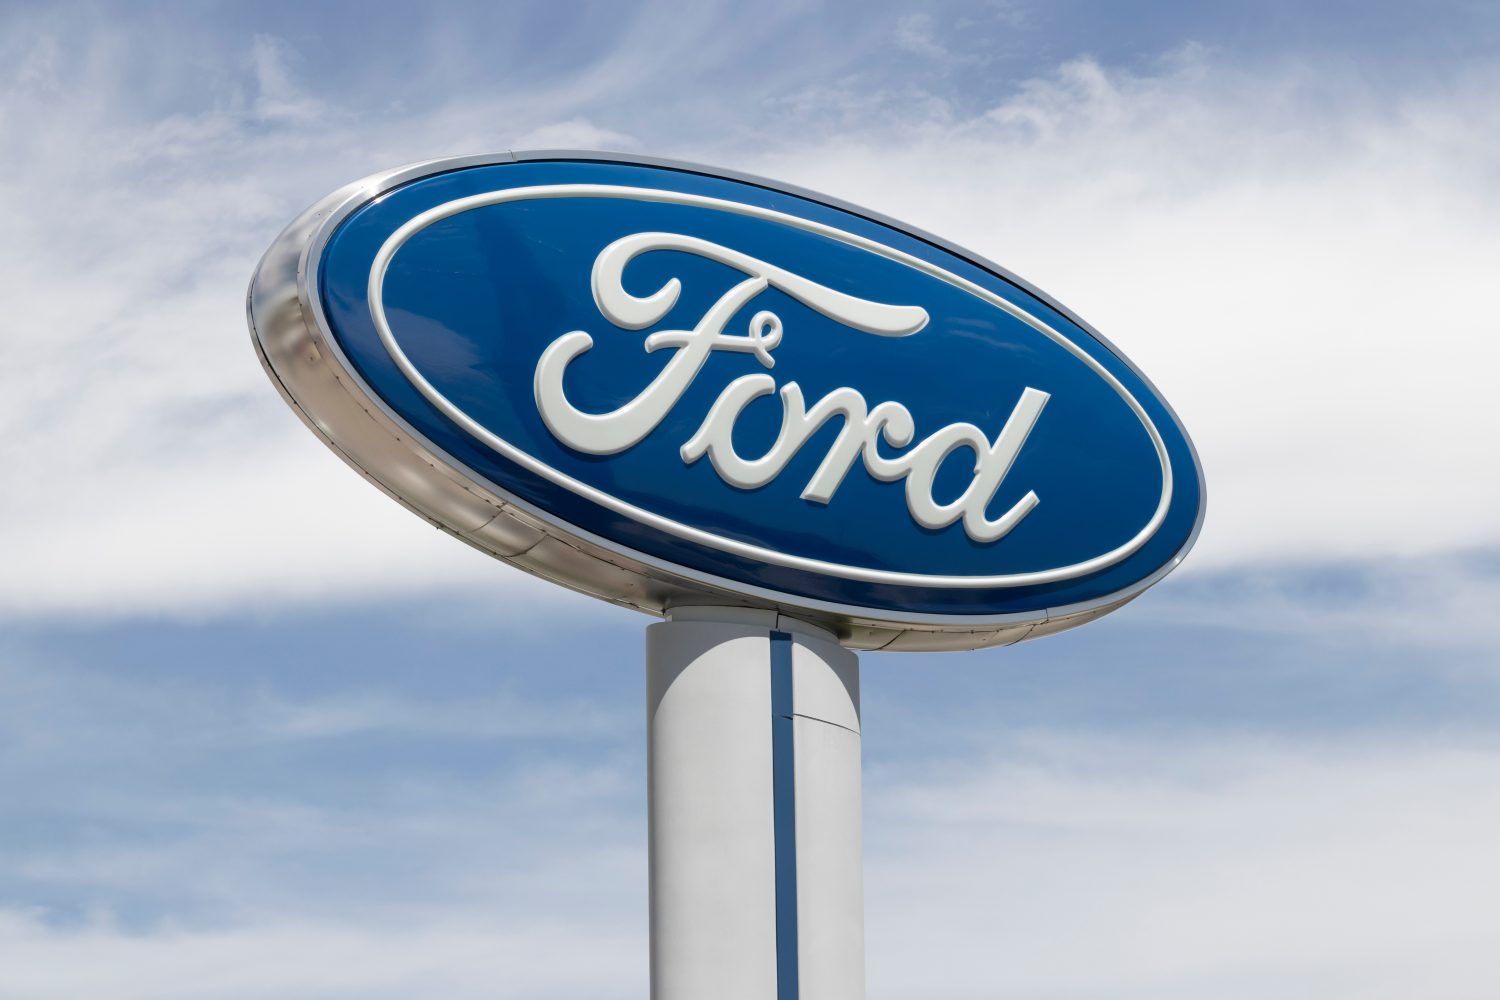 Ford announced its support for the Biden administration's ambitious plan to reduce vehicle emissions by 2032, dismissing Republican claims.